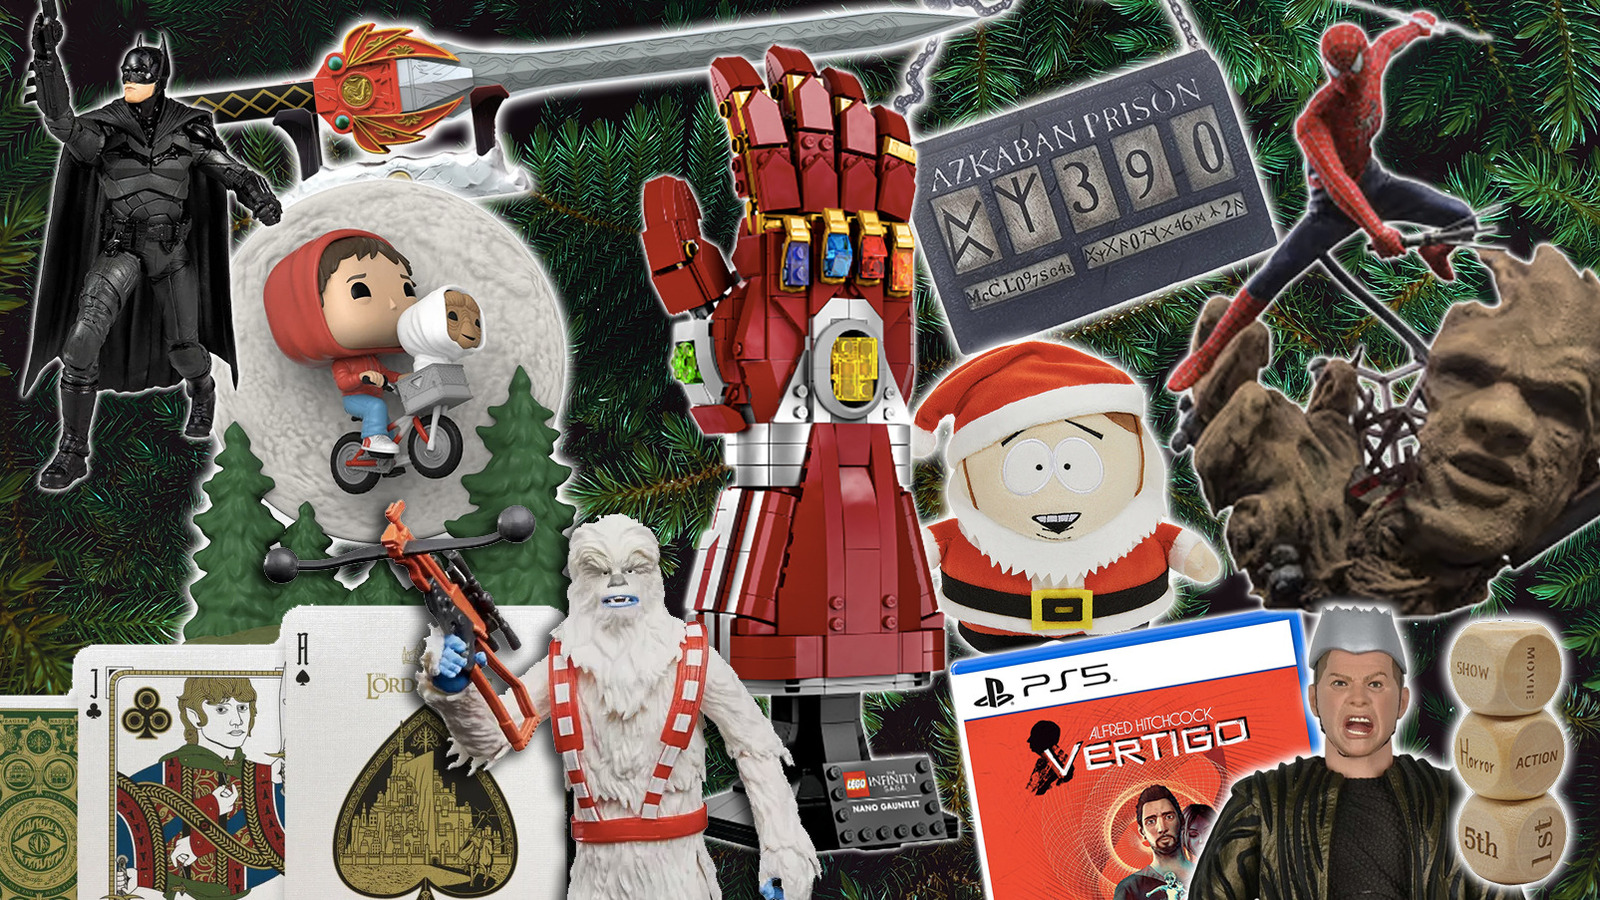 Playmobil's Back to the Future 2020 Advent Calendar Recreates Iconic Movie  Moments